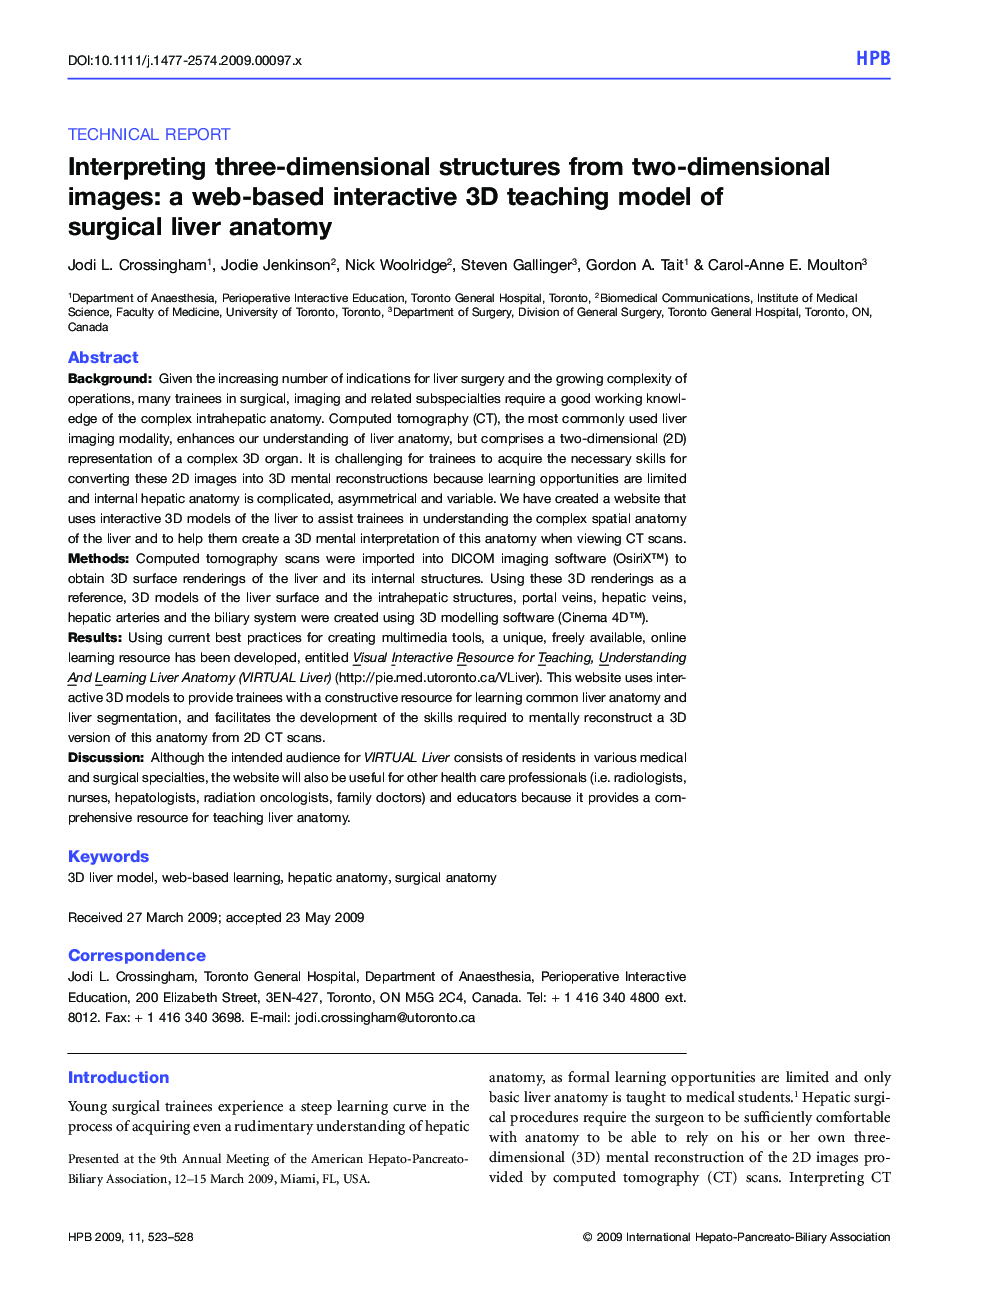 Interpreting three-dimensional structures from two-dimensional images: a web-based interactive 3D teaching model of surgical liver anatomy